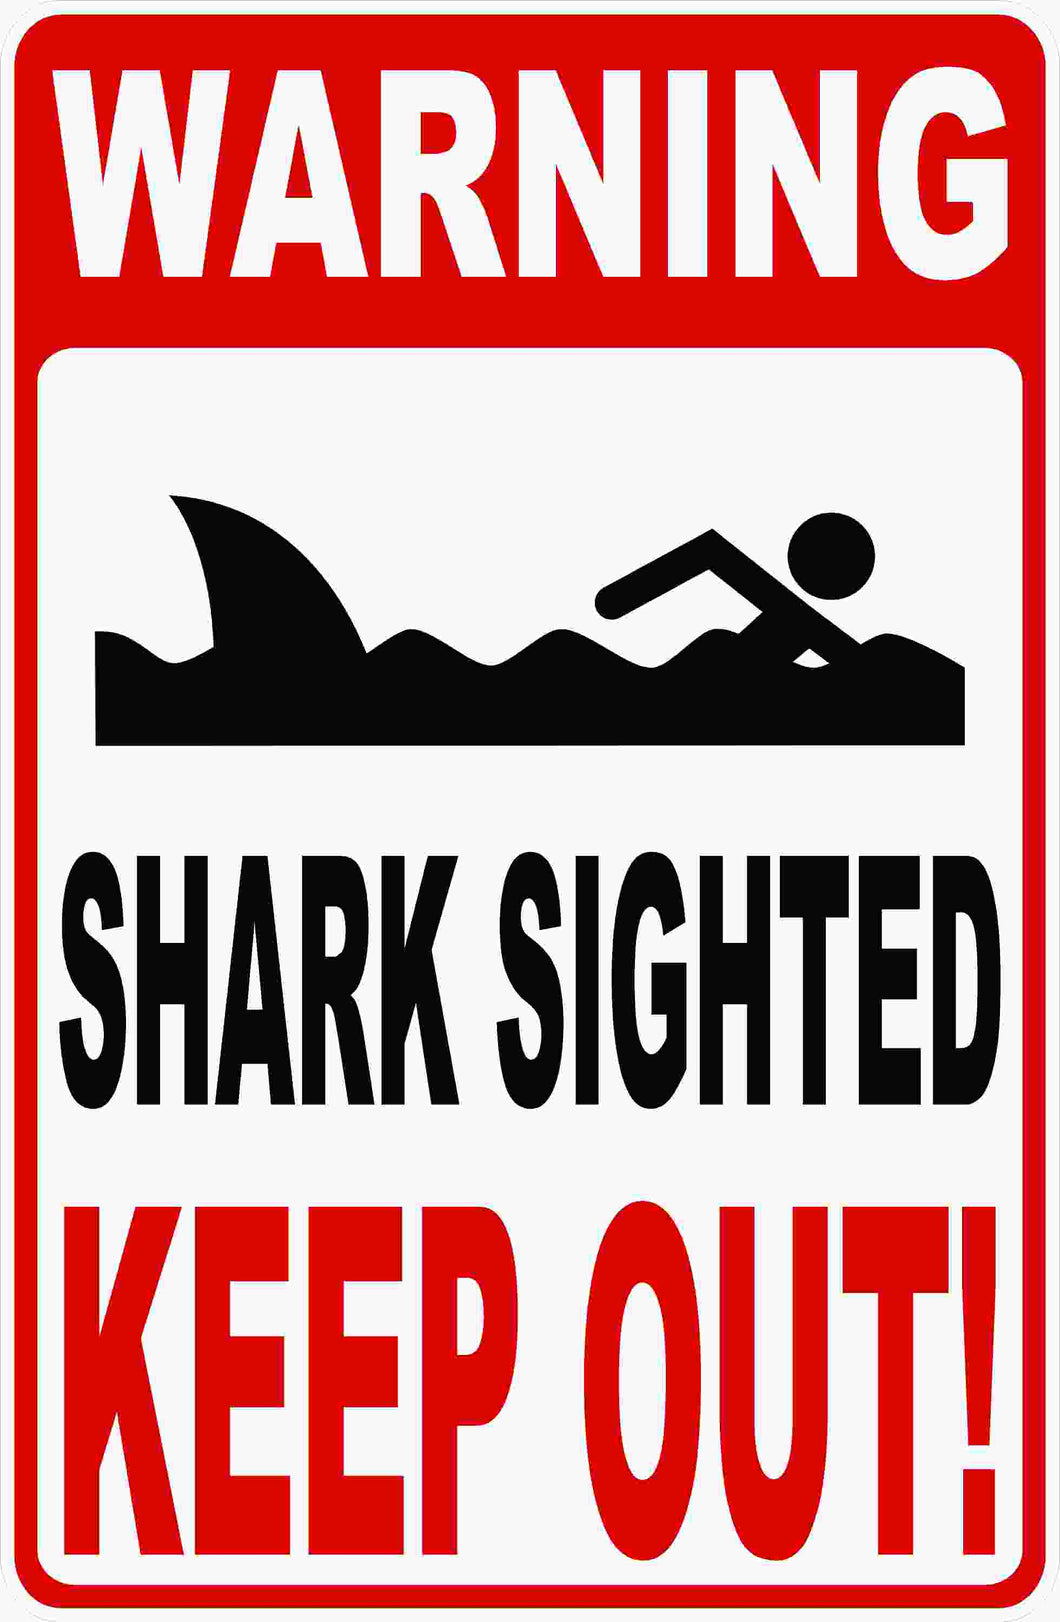 Shark in Area Keep Out of Water Sign